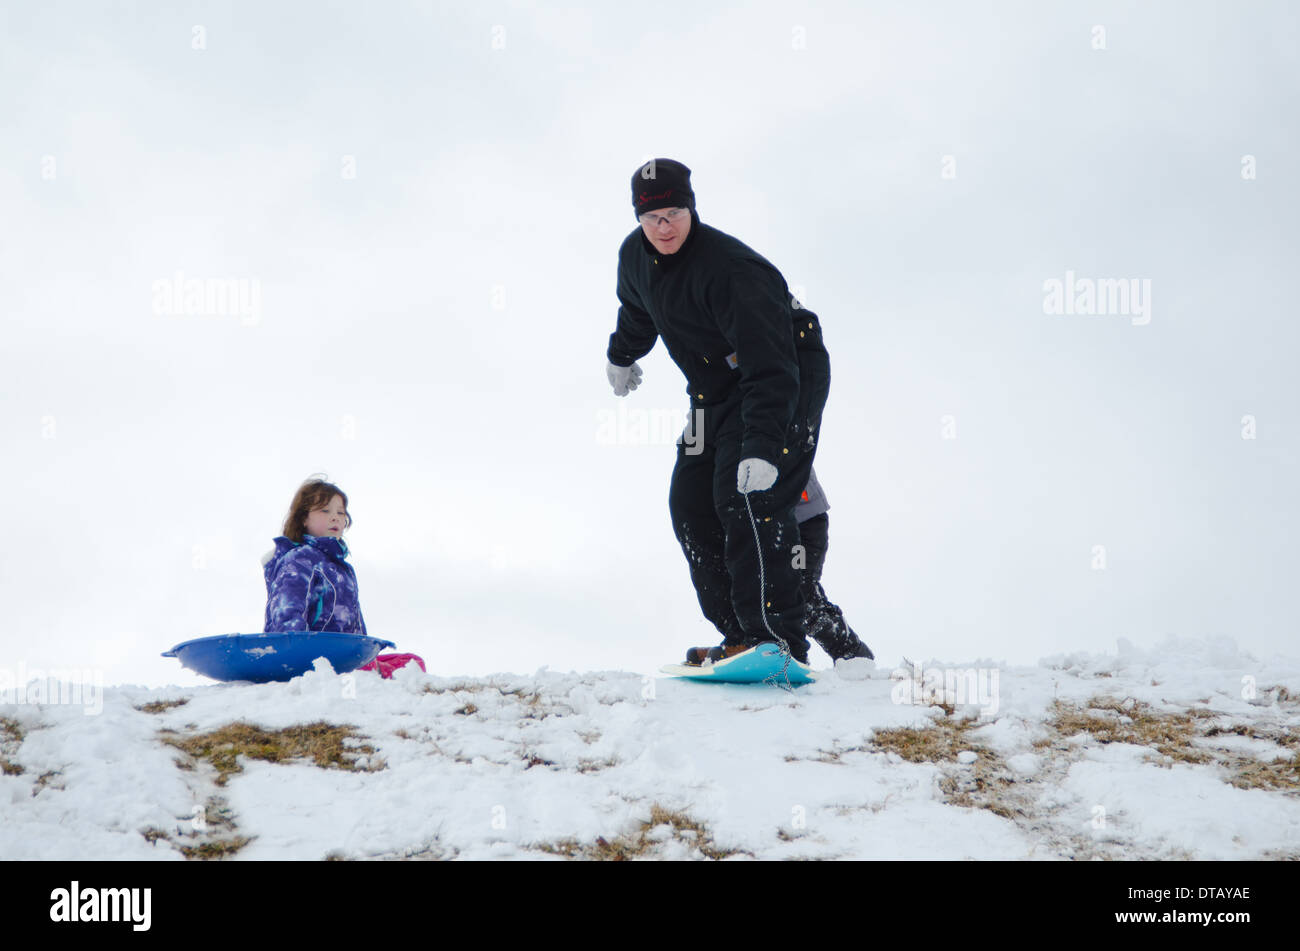 A Daredevil Dad And His Unimpressed Daughter Enjoy A Day Of Sledding On A Rare Snow Day In Knoxville, Tennessee. Stock Photo